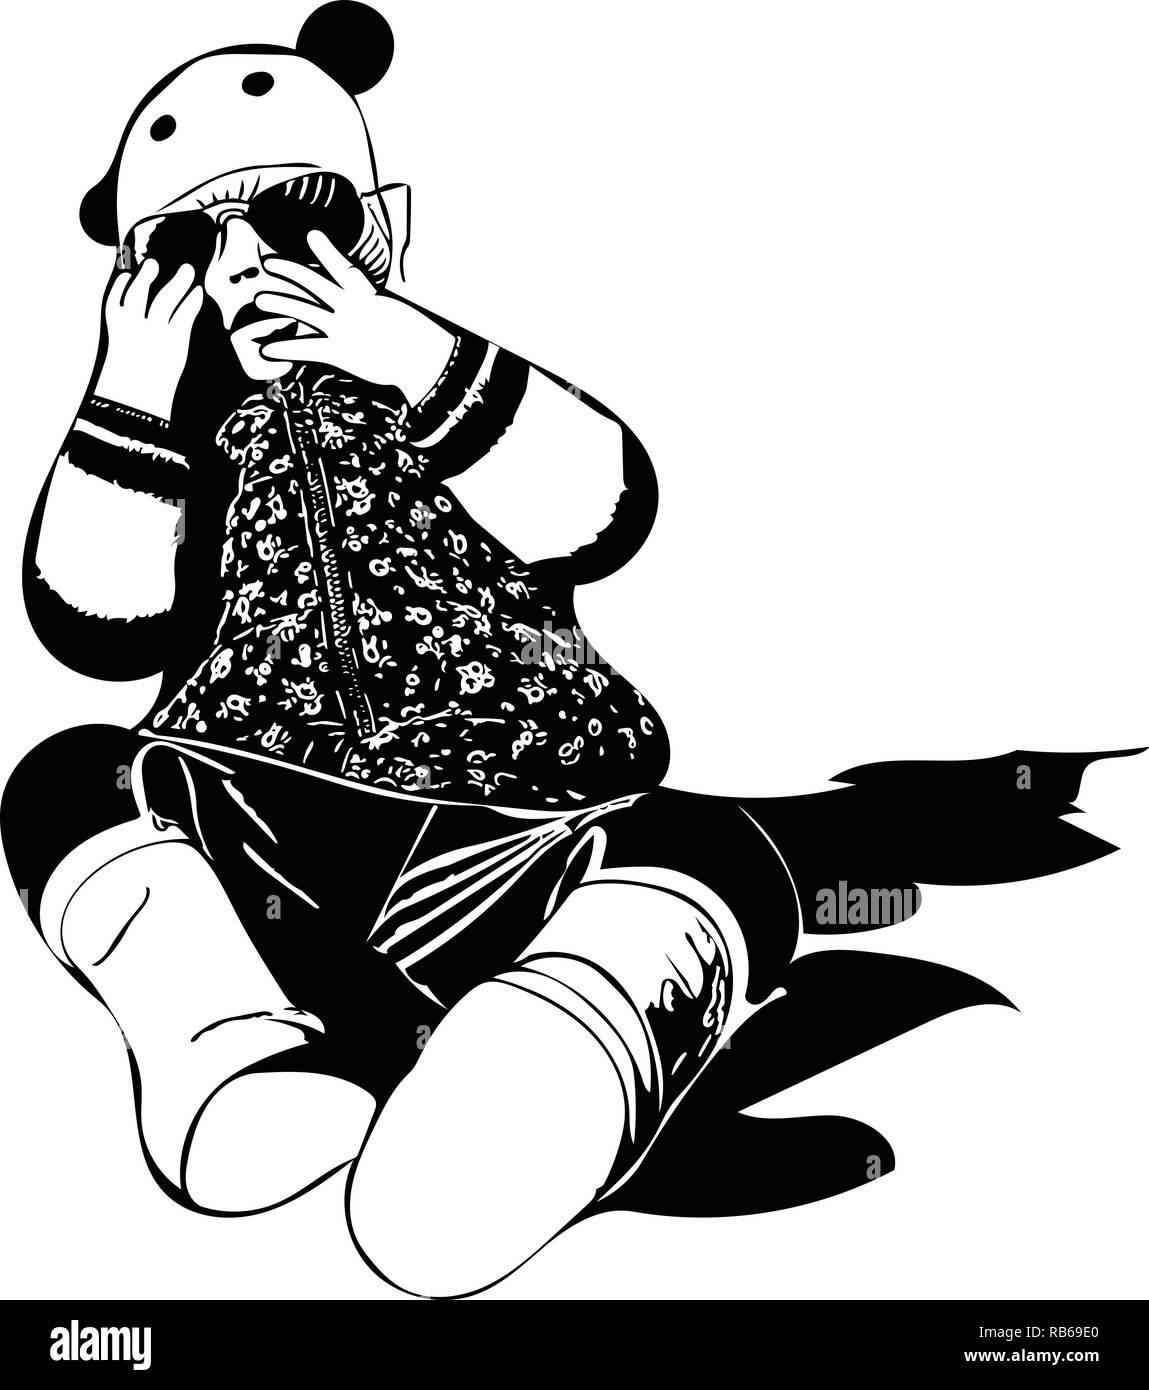 Black and white vector graphic of young child sitting on floor with arms raised touchig a large pair of sunglasses. Stock Vector